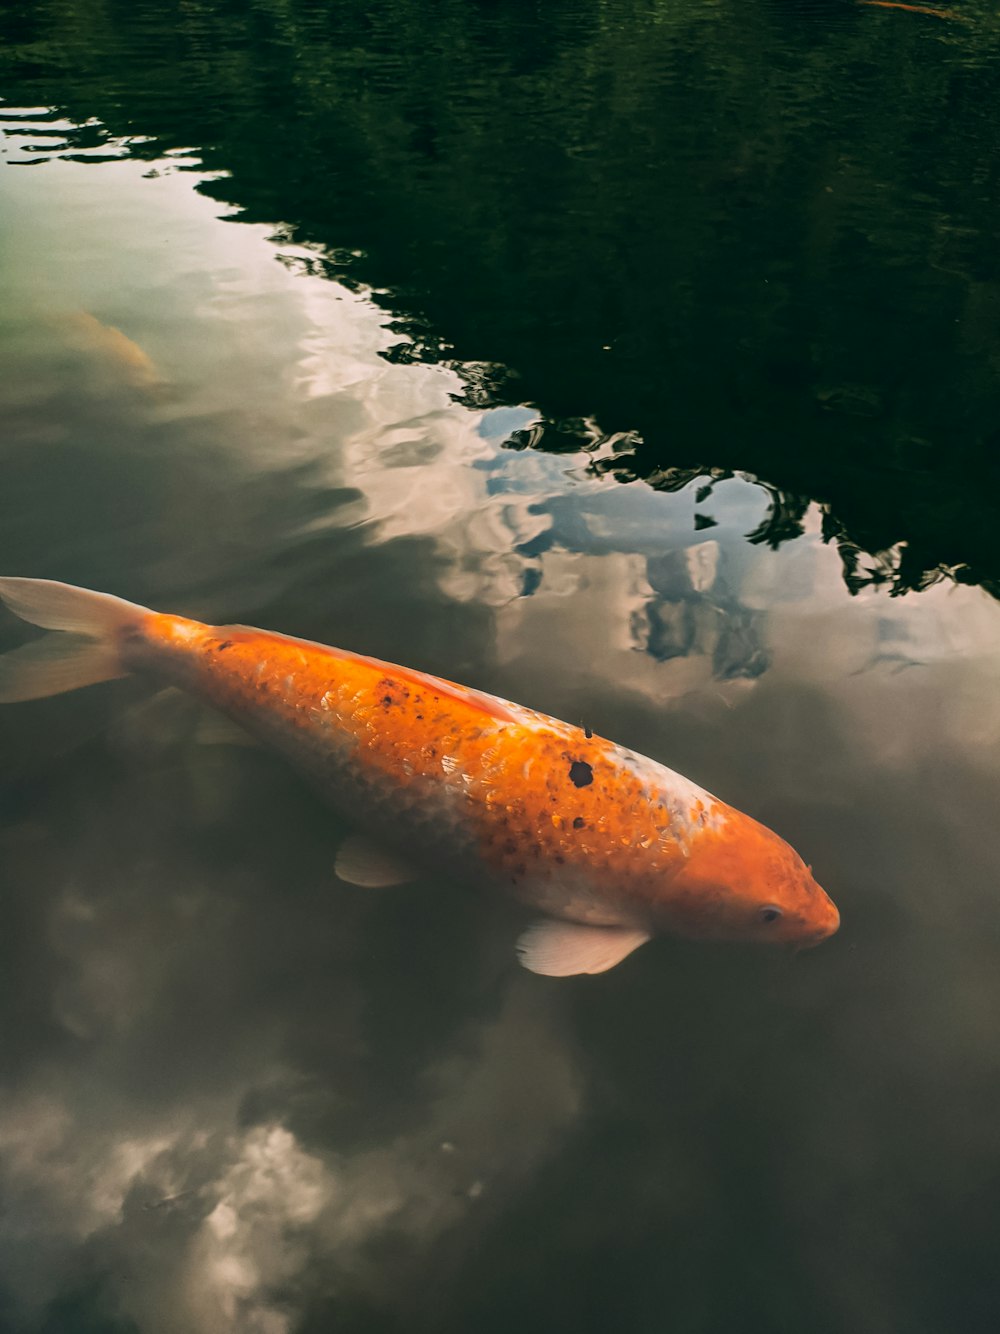 a large orange fish swimming in a pond